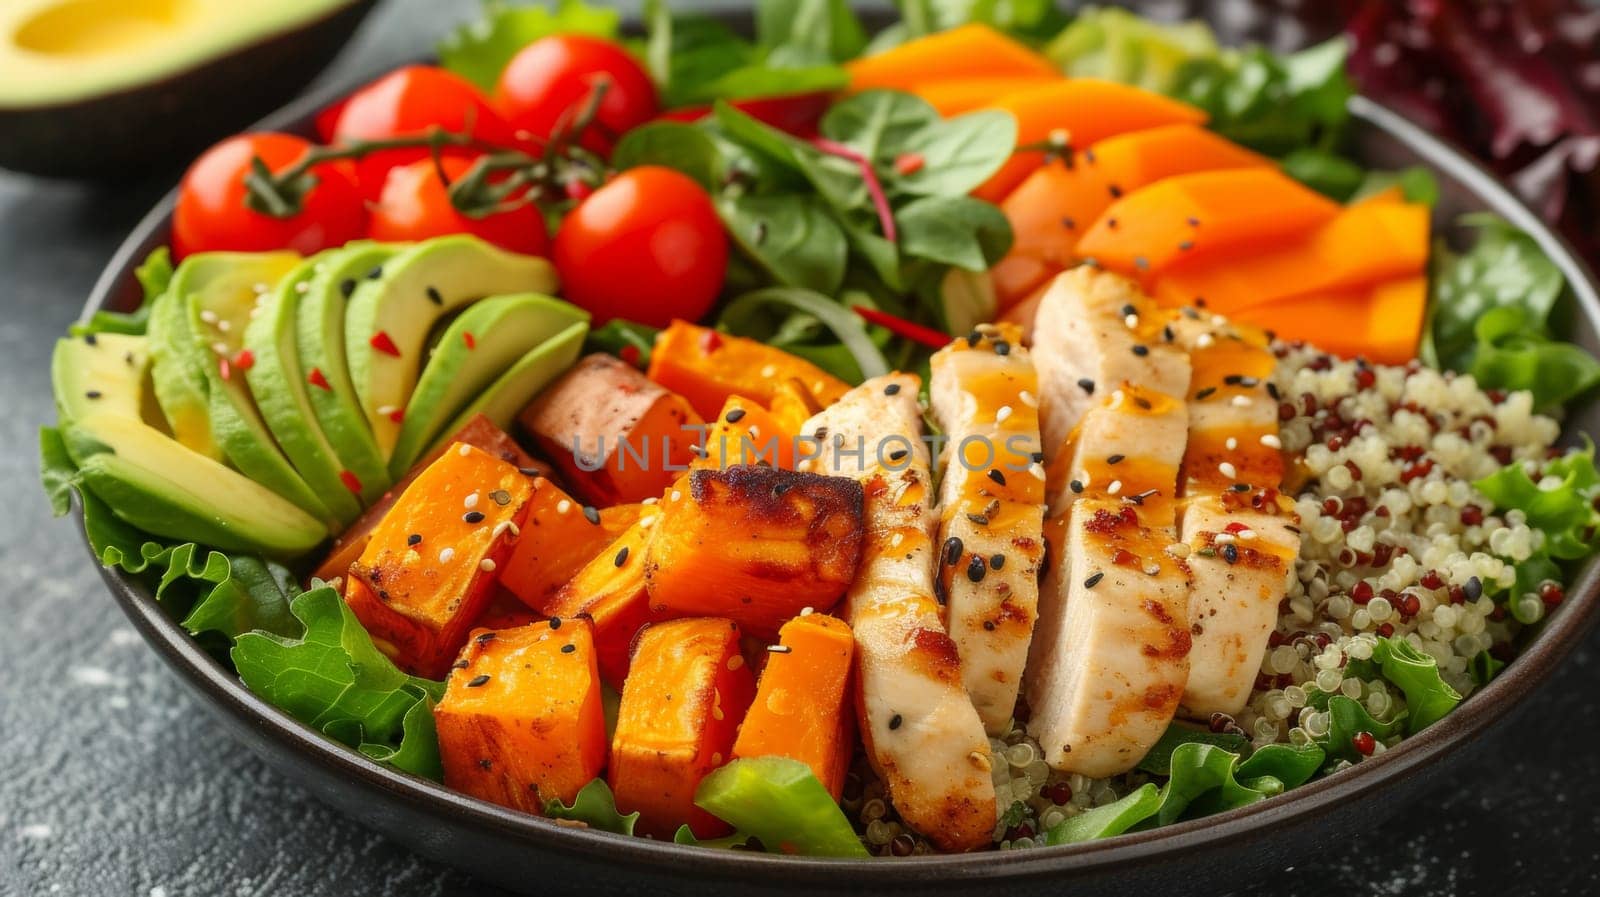 A bowl of a salad with chicken, avocado and tomatoes, AI by starush